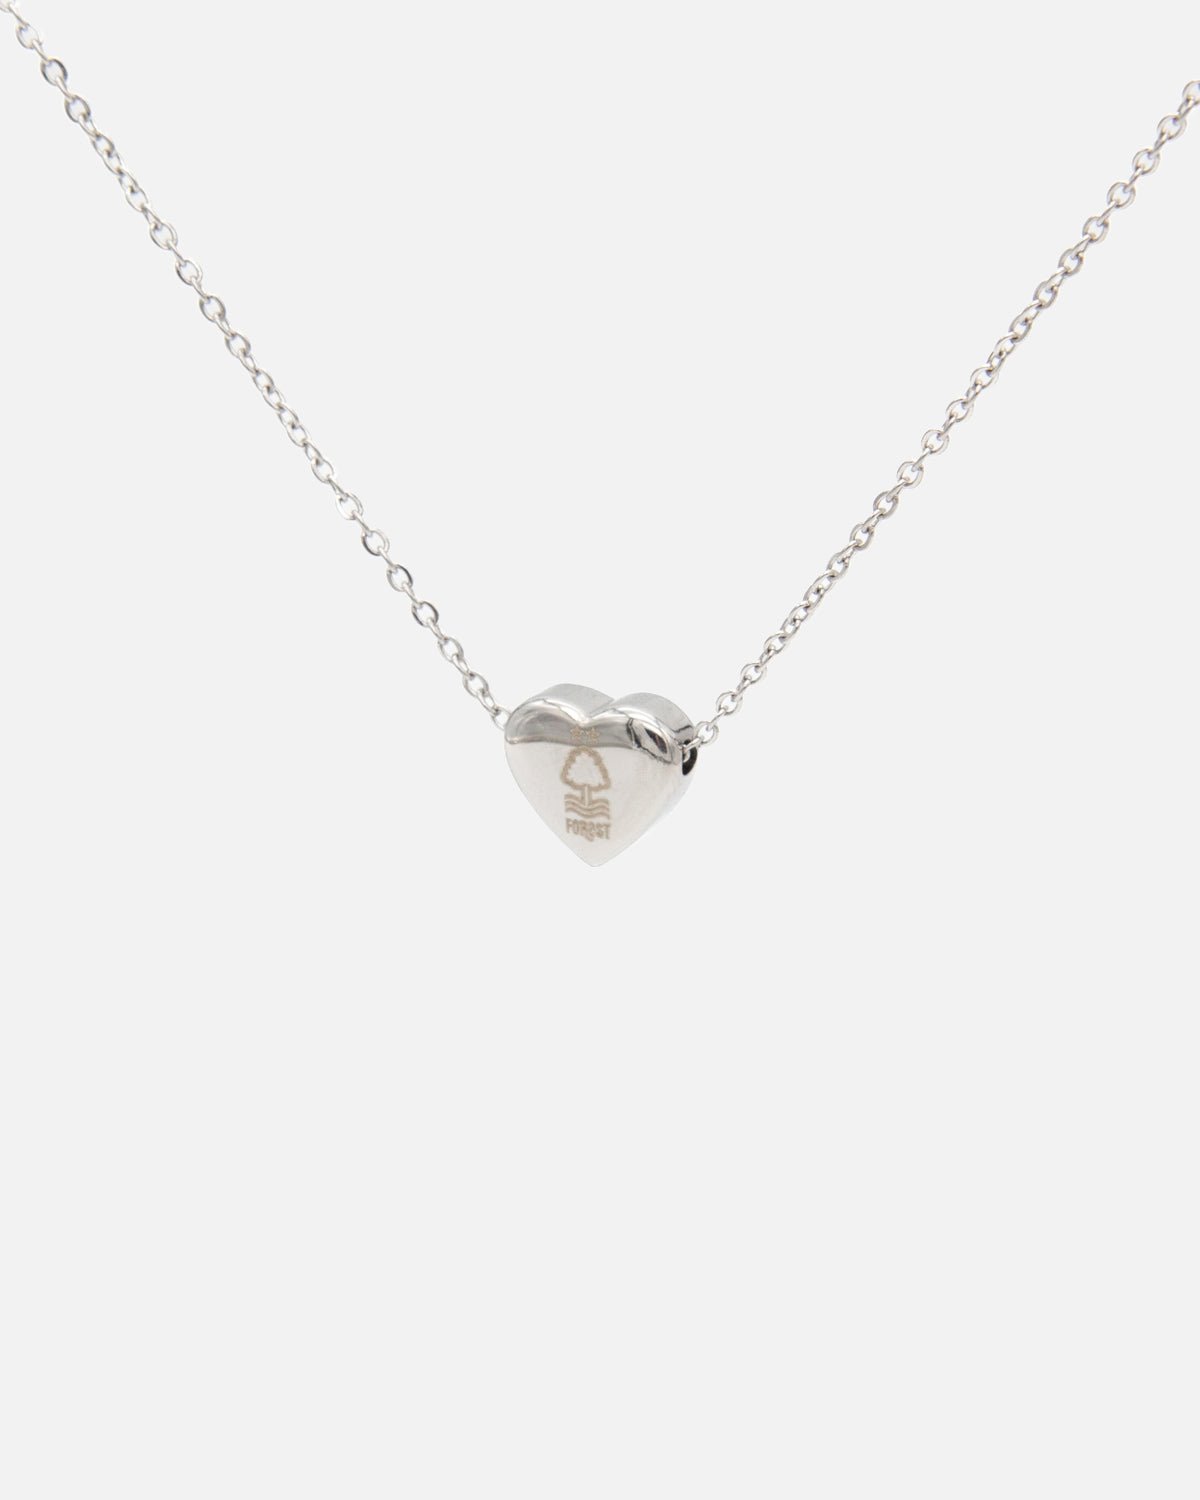 NFFC Heart Necklace - Nottingham Forest FC